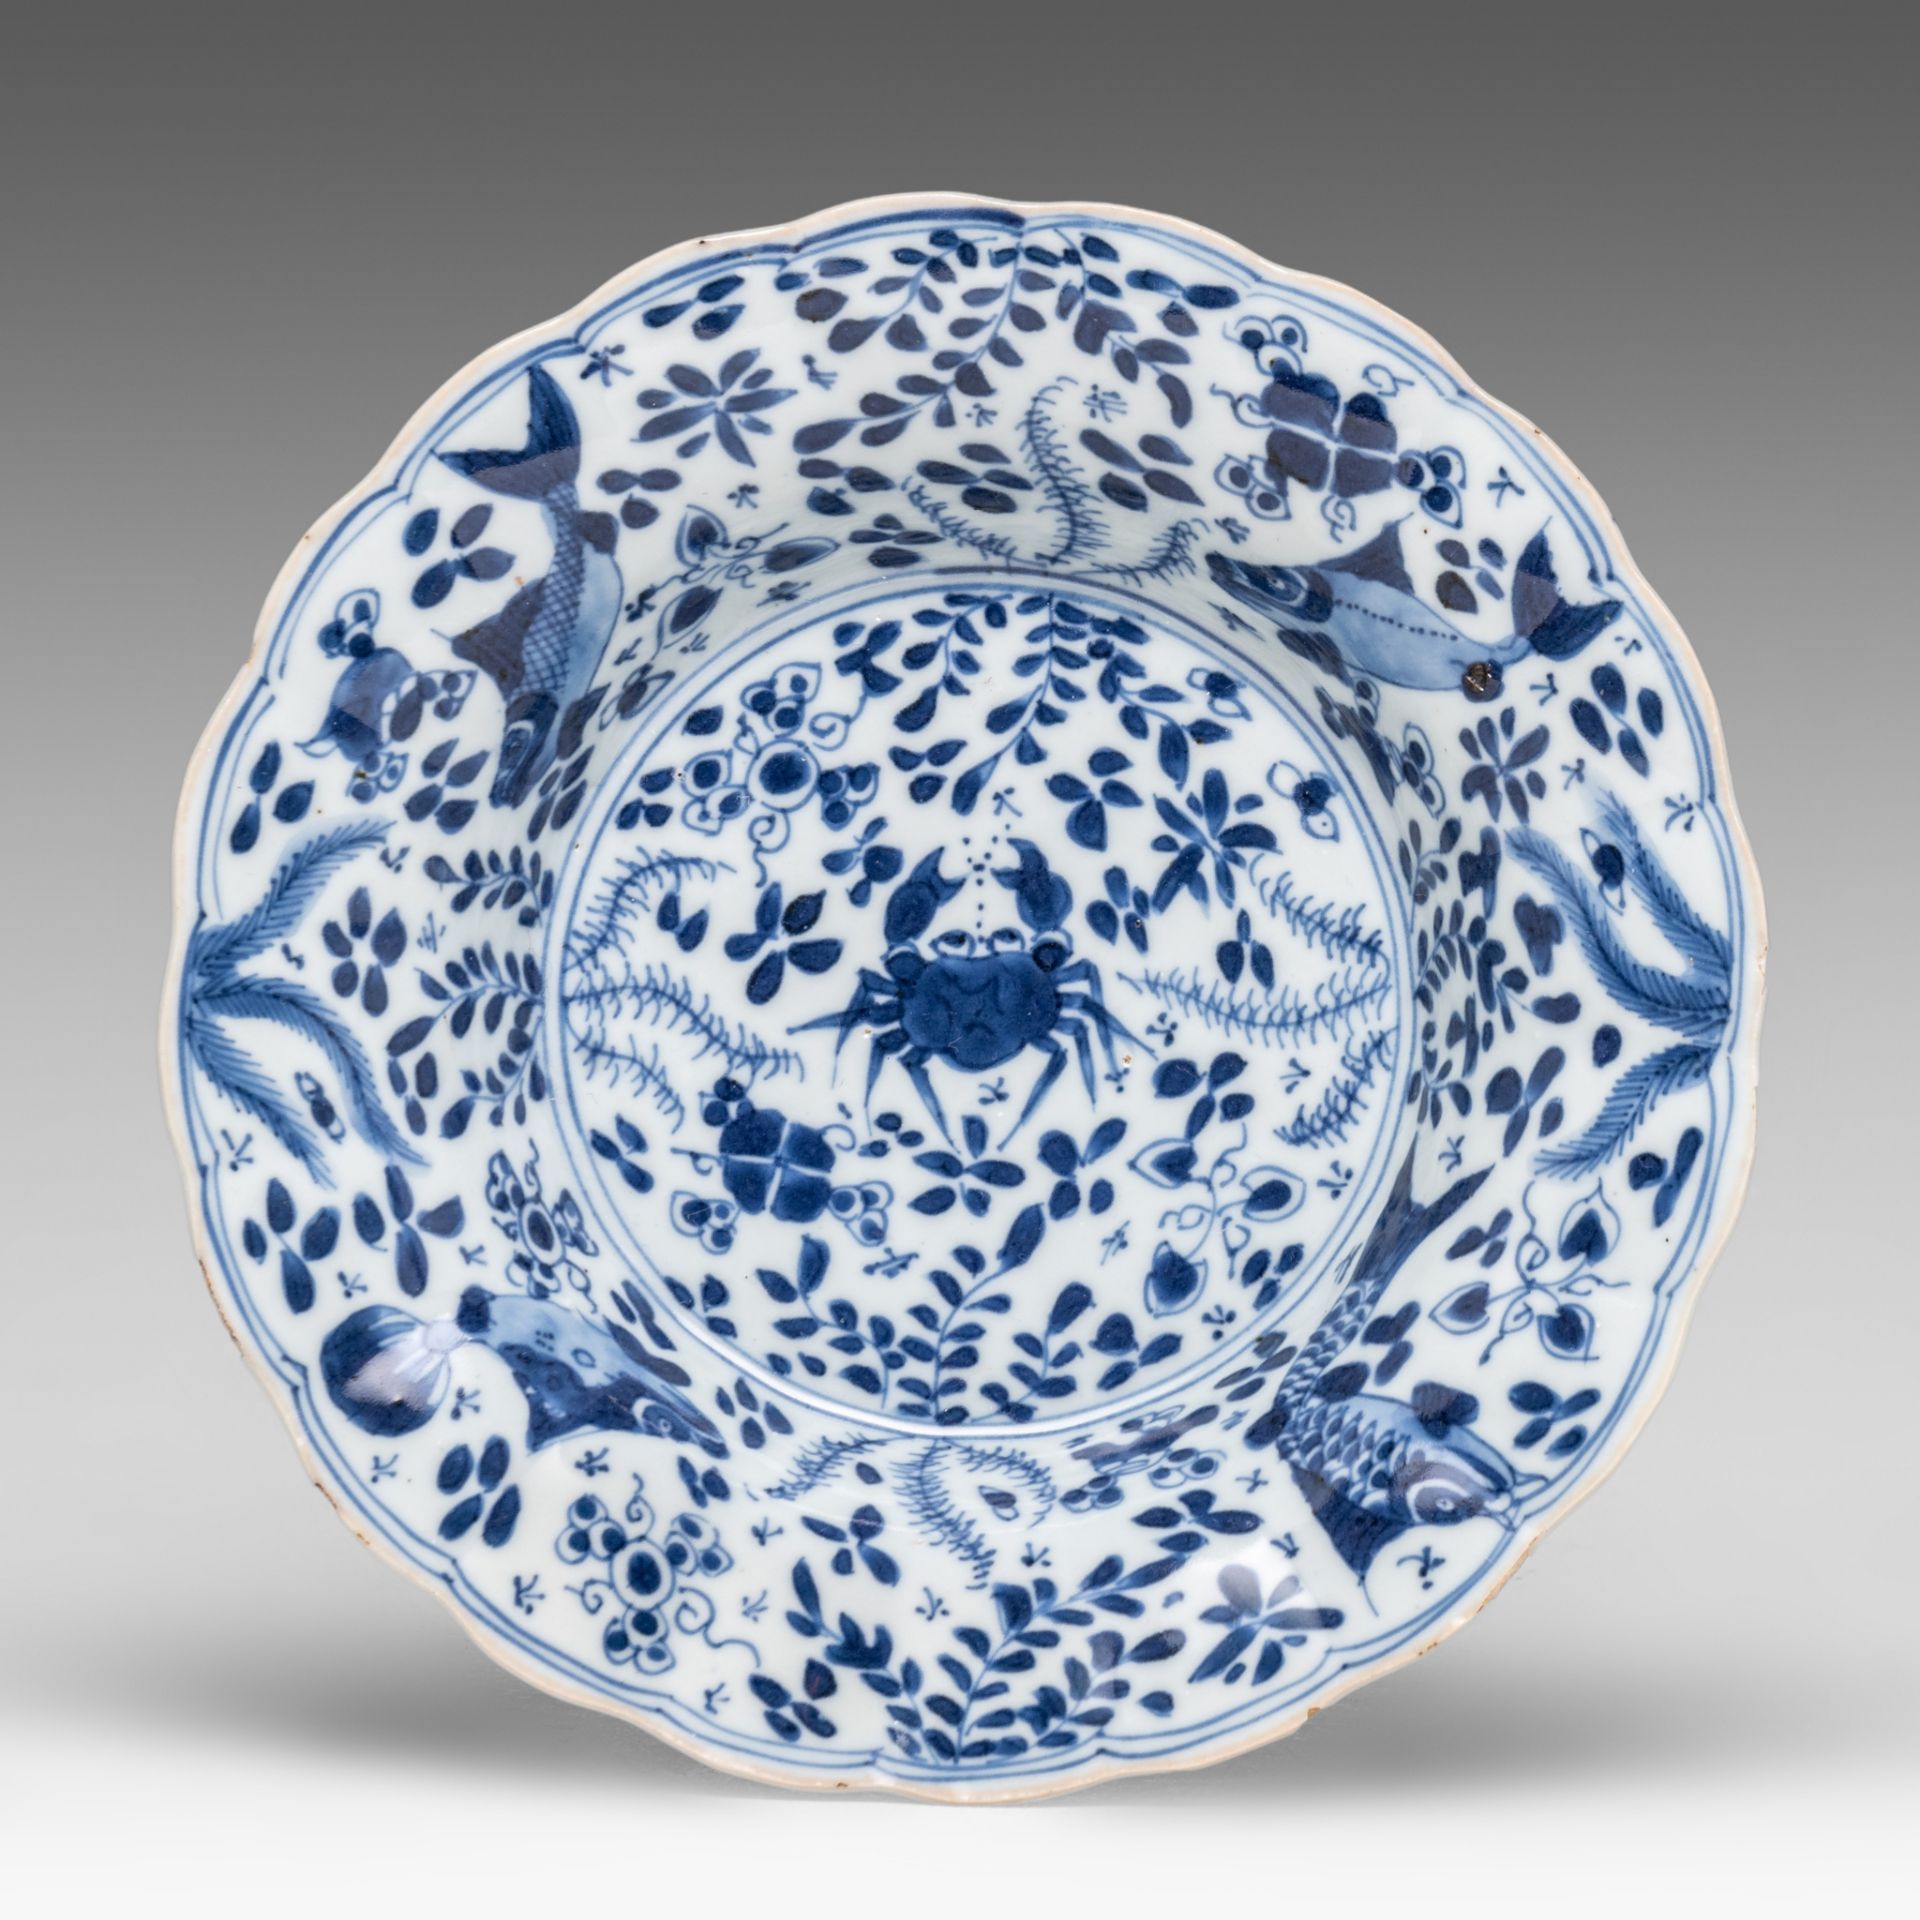 A series of three Chinese blue and white 'Crab and fish' deep dishes, Kangxi period, dia 20 cm - add - Image 6 of 7